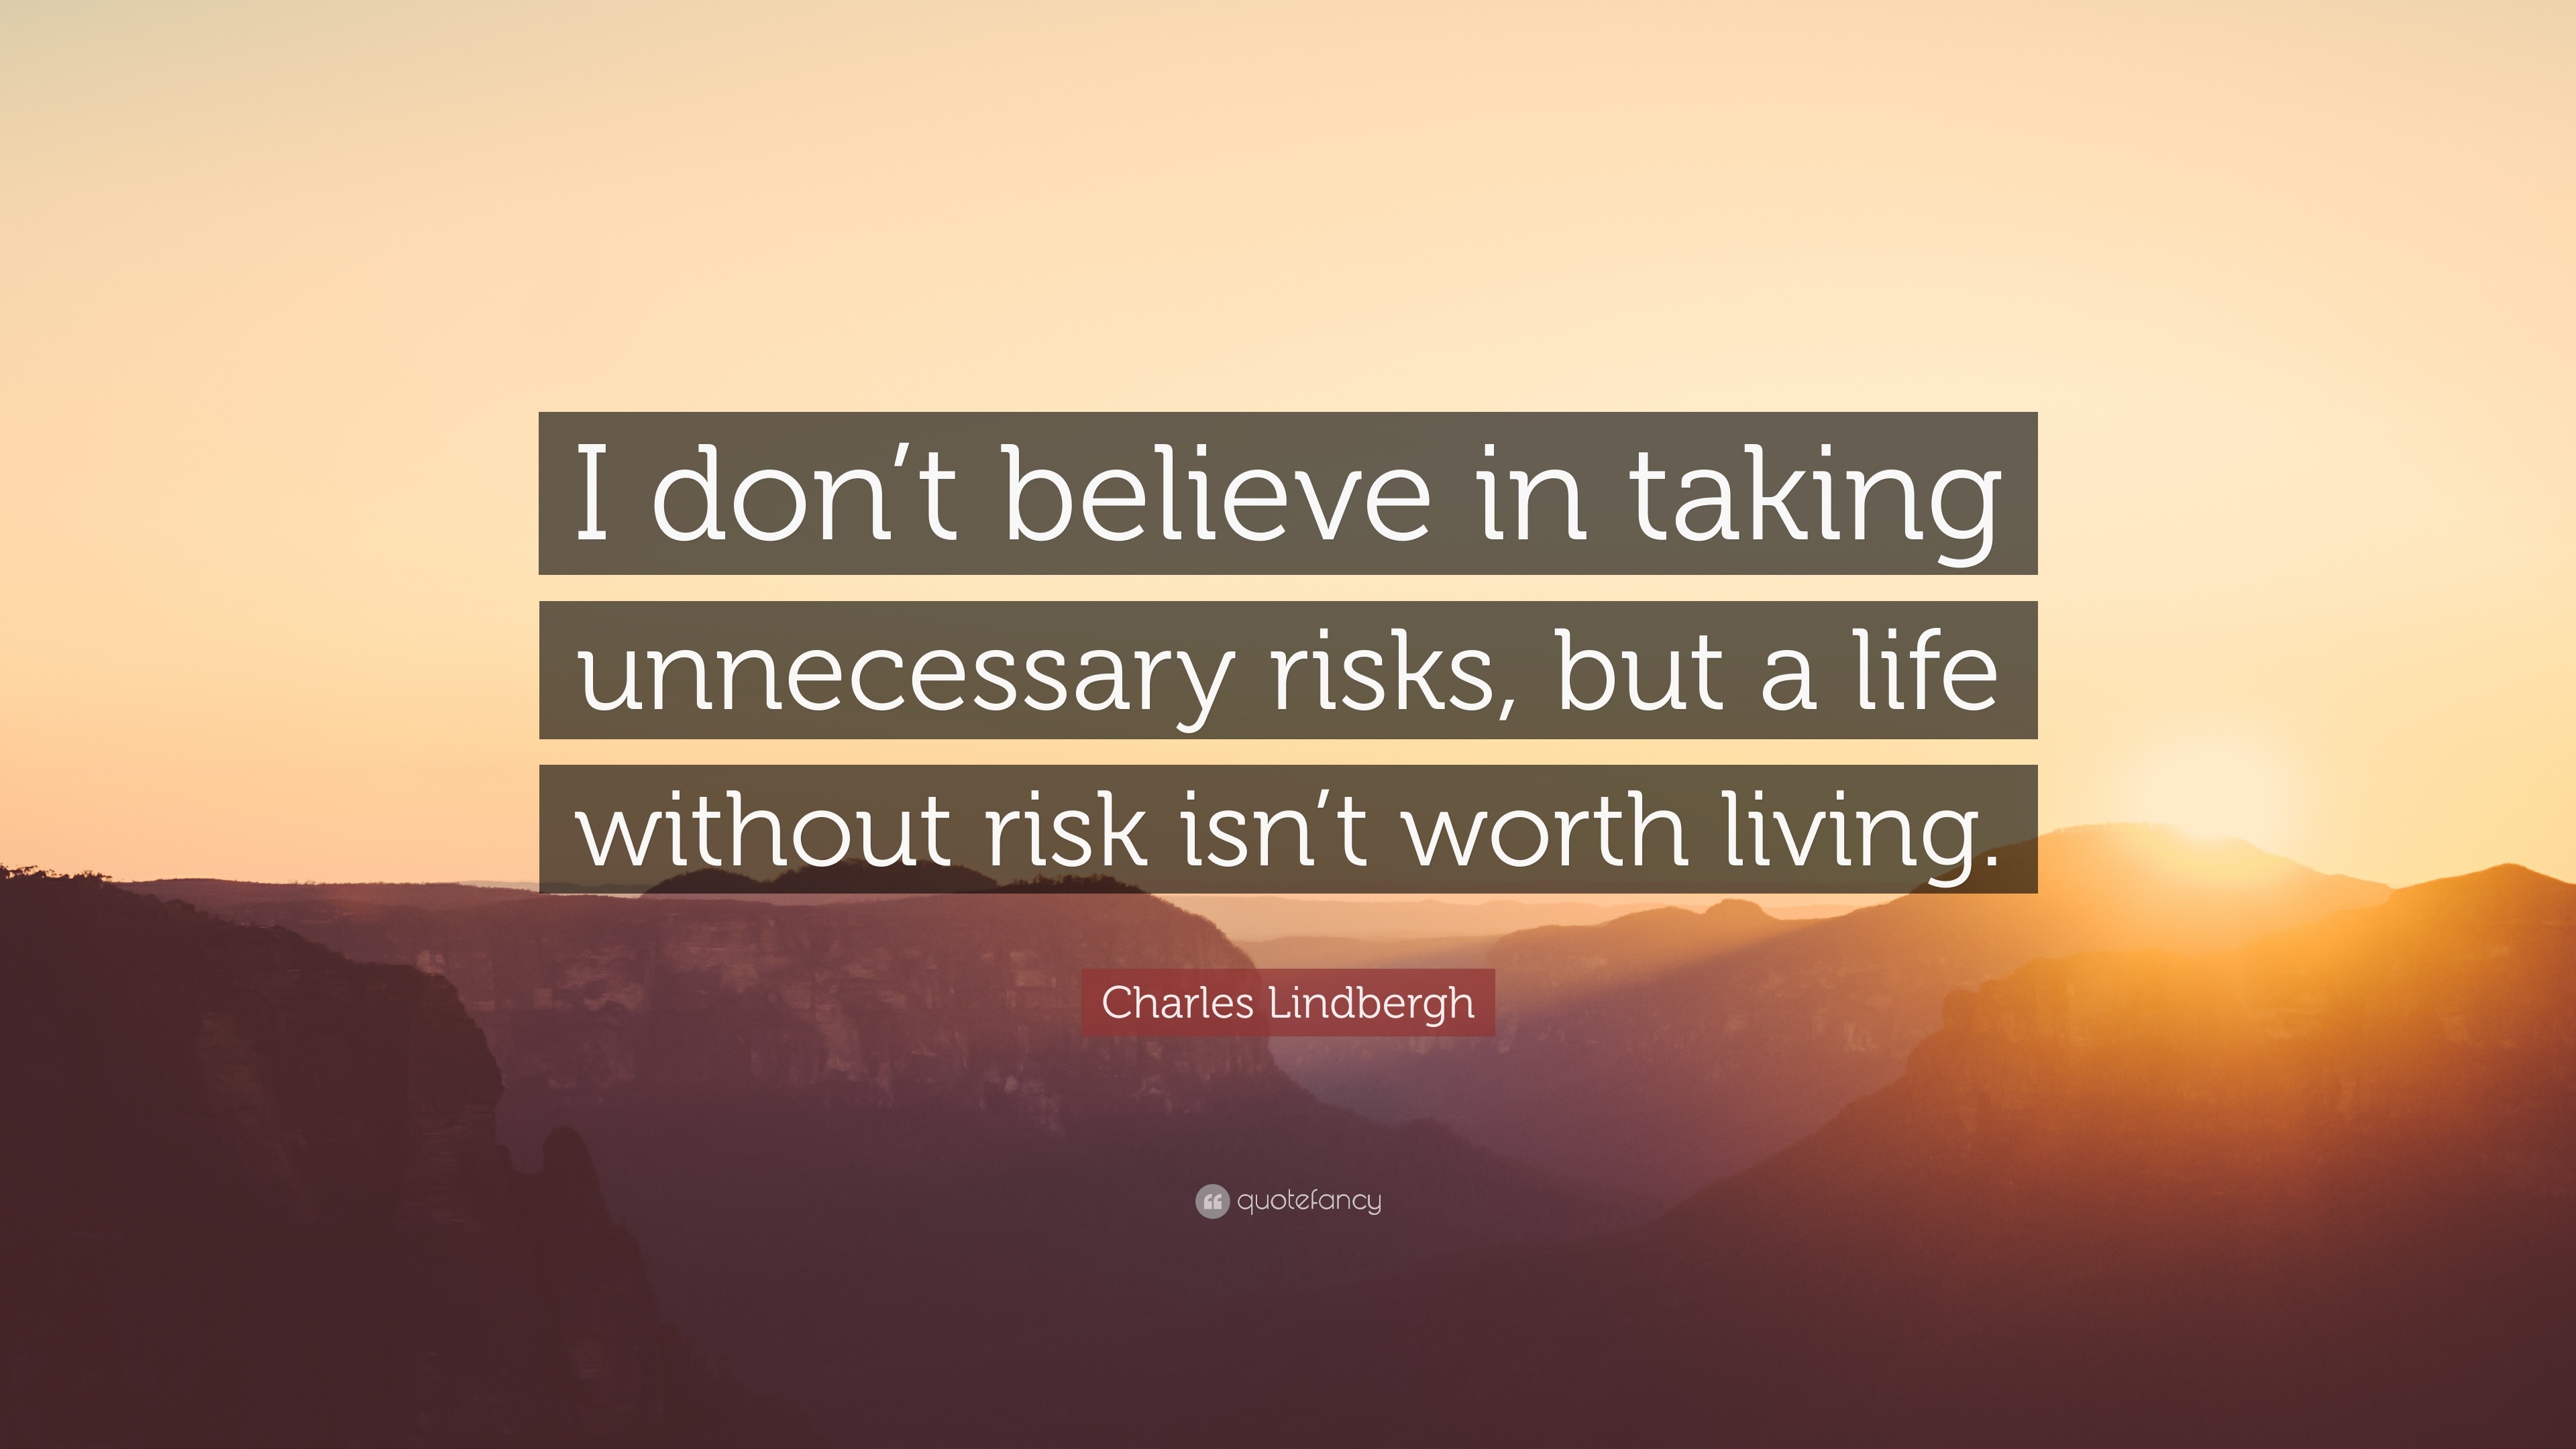 Charles Lindbergh Quote “I don t believe in taking unnecessary risks but